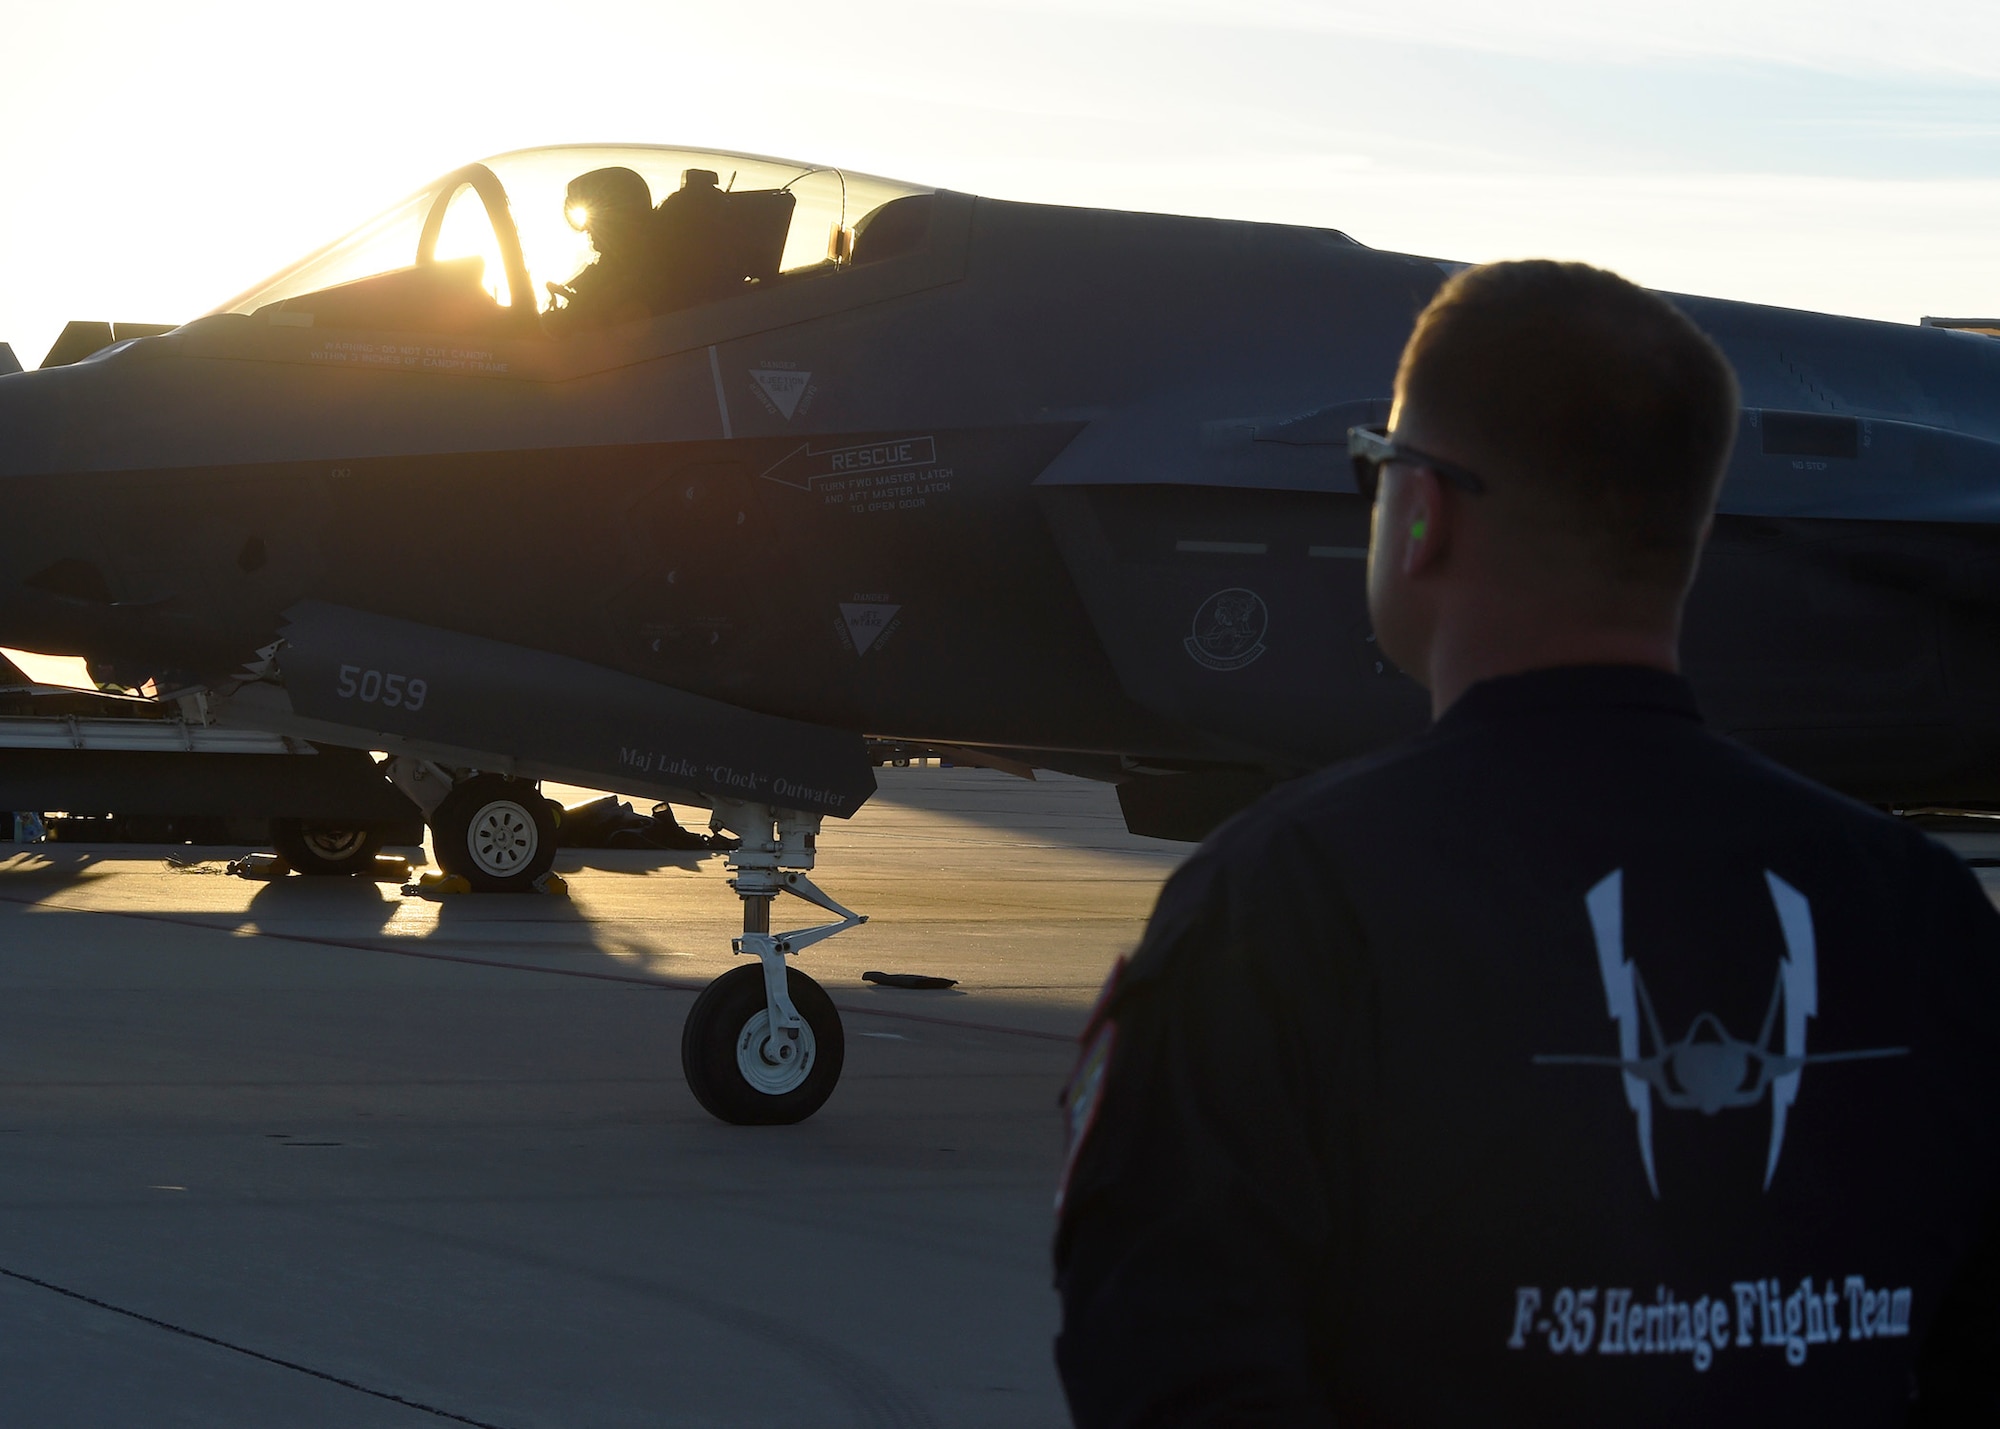 Senior Master Sgt. Sam Smith, 61st Fighter Squadron F-35 heritage flight superintendent, stands by for Maj. Will Andreotta, 61st FS heritage flight pilot, to get out of his jet after flying during the Heritage Flight Training and Certification Course Feb. 10, 2017, at Davis-Monthan Air Force Base, Ariz. Heritage and demonstration teams need to be certified annually to participate in open houses and air shows worldwide. (U.S. Air Force photo by Senior Airman James Hensley)  